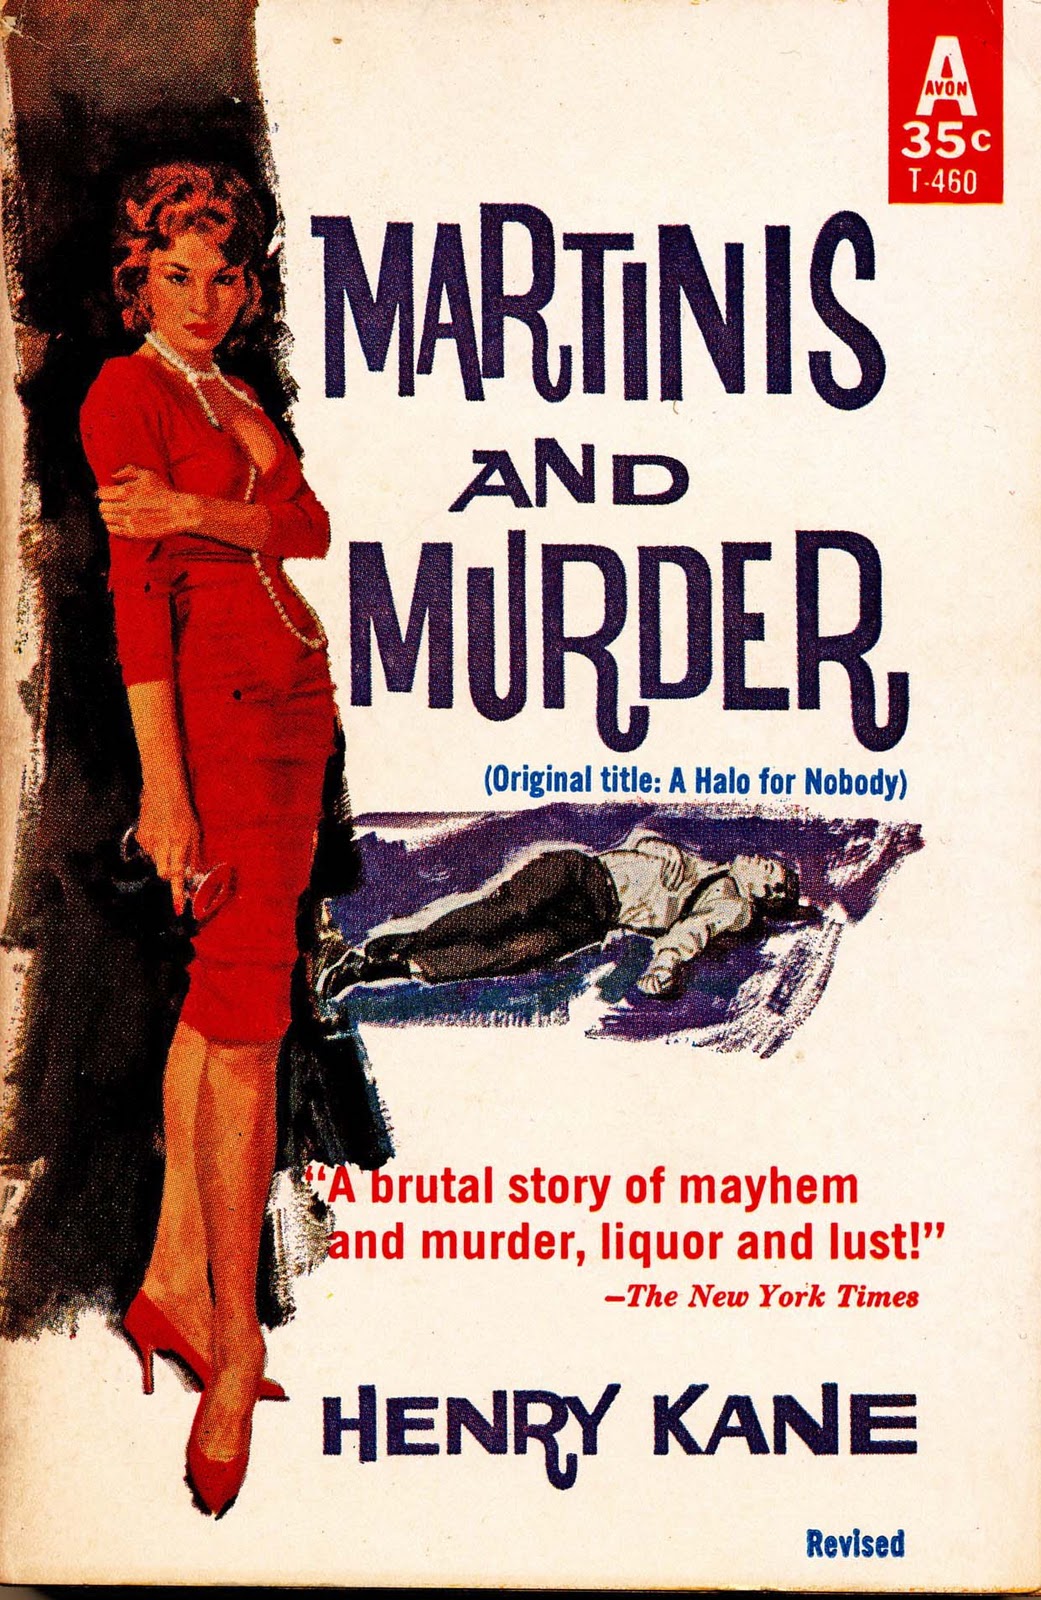 Martinis and Murder by Henry Kane